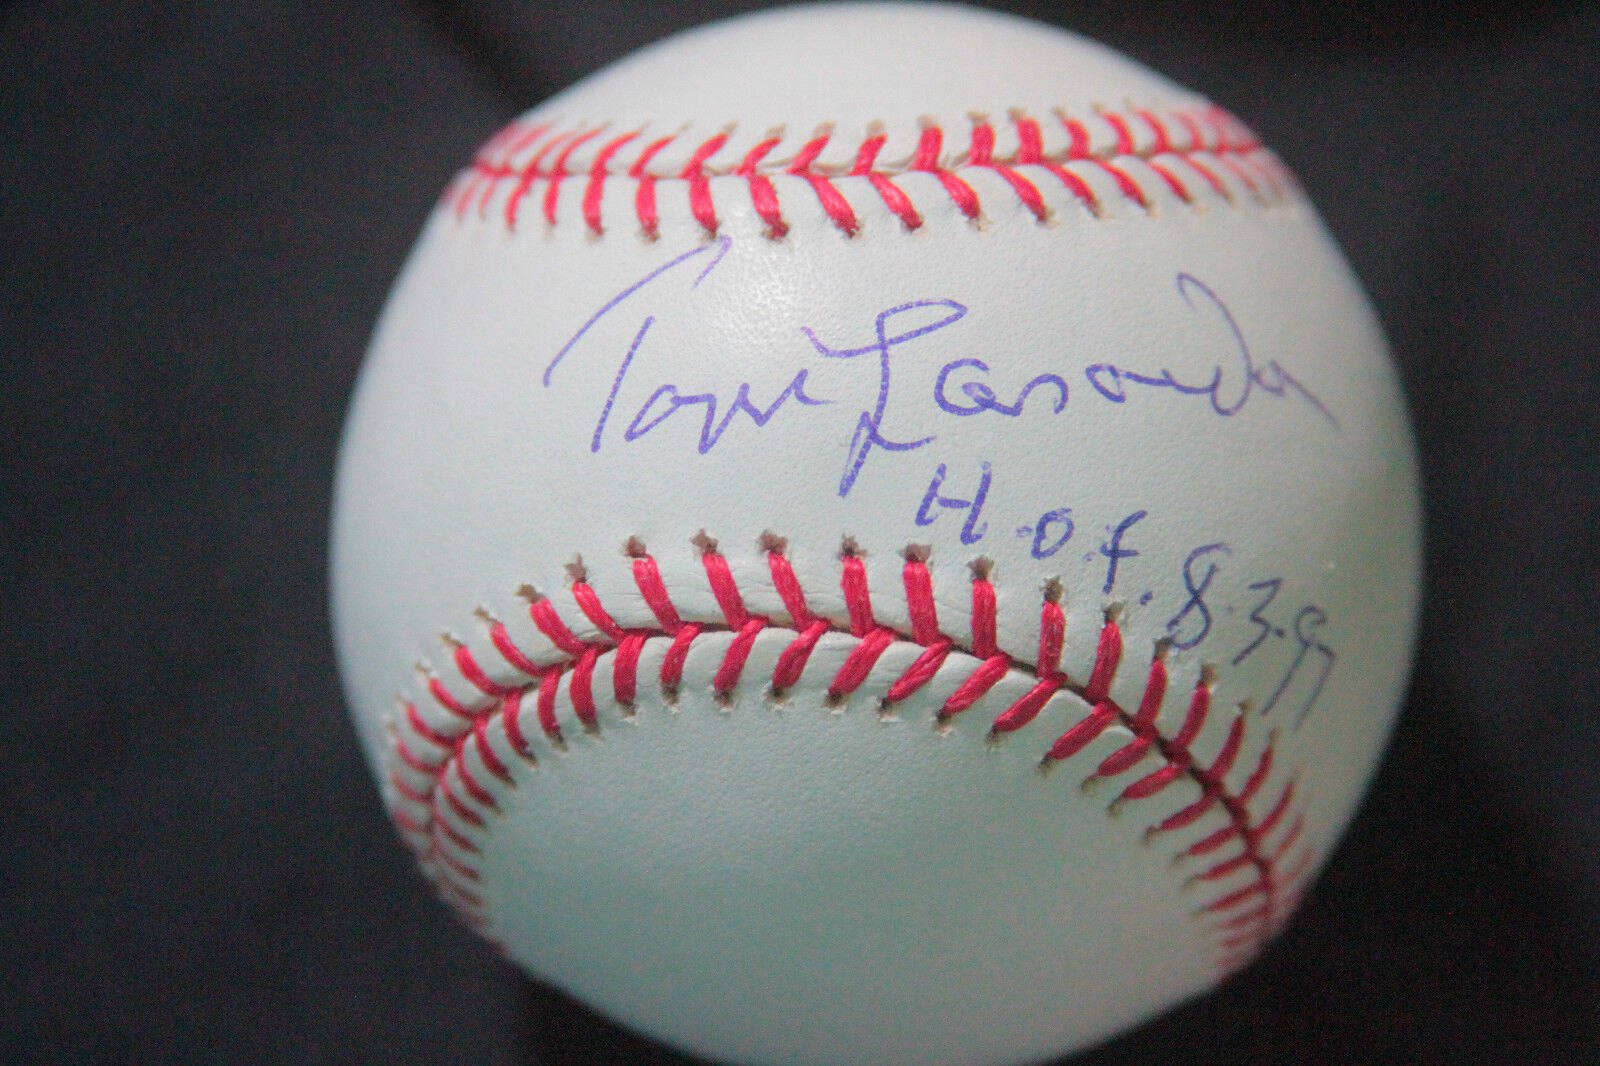 TOMMY LASORDA AUTOGRAPED SIGNED BASEBALL LOS ANGELES DODGERS WITH INSCRIPTION